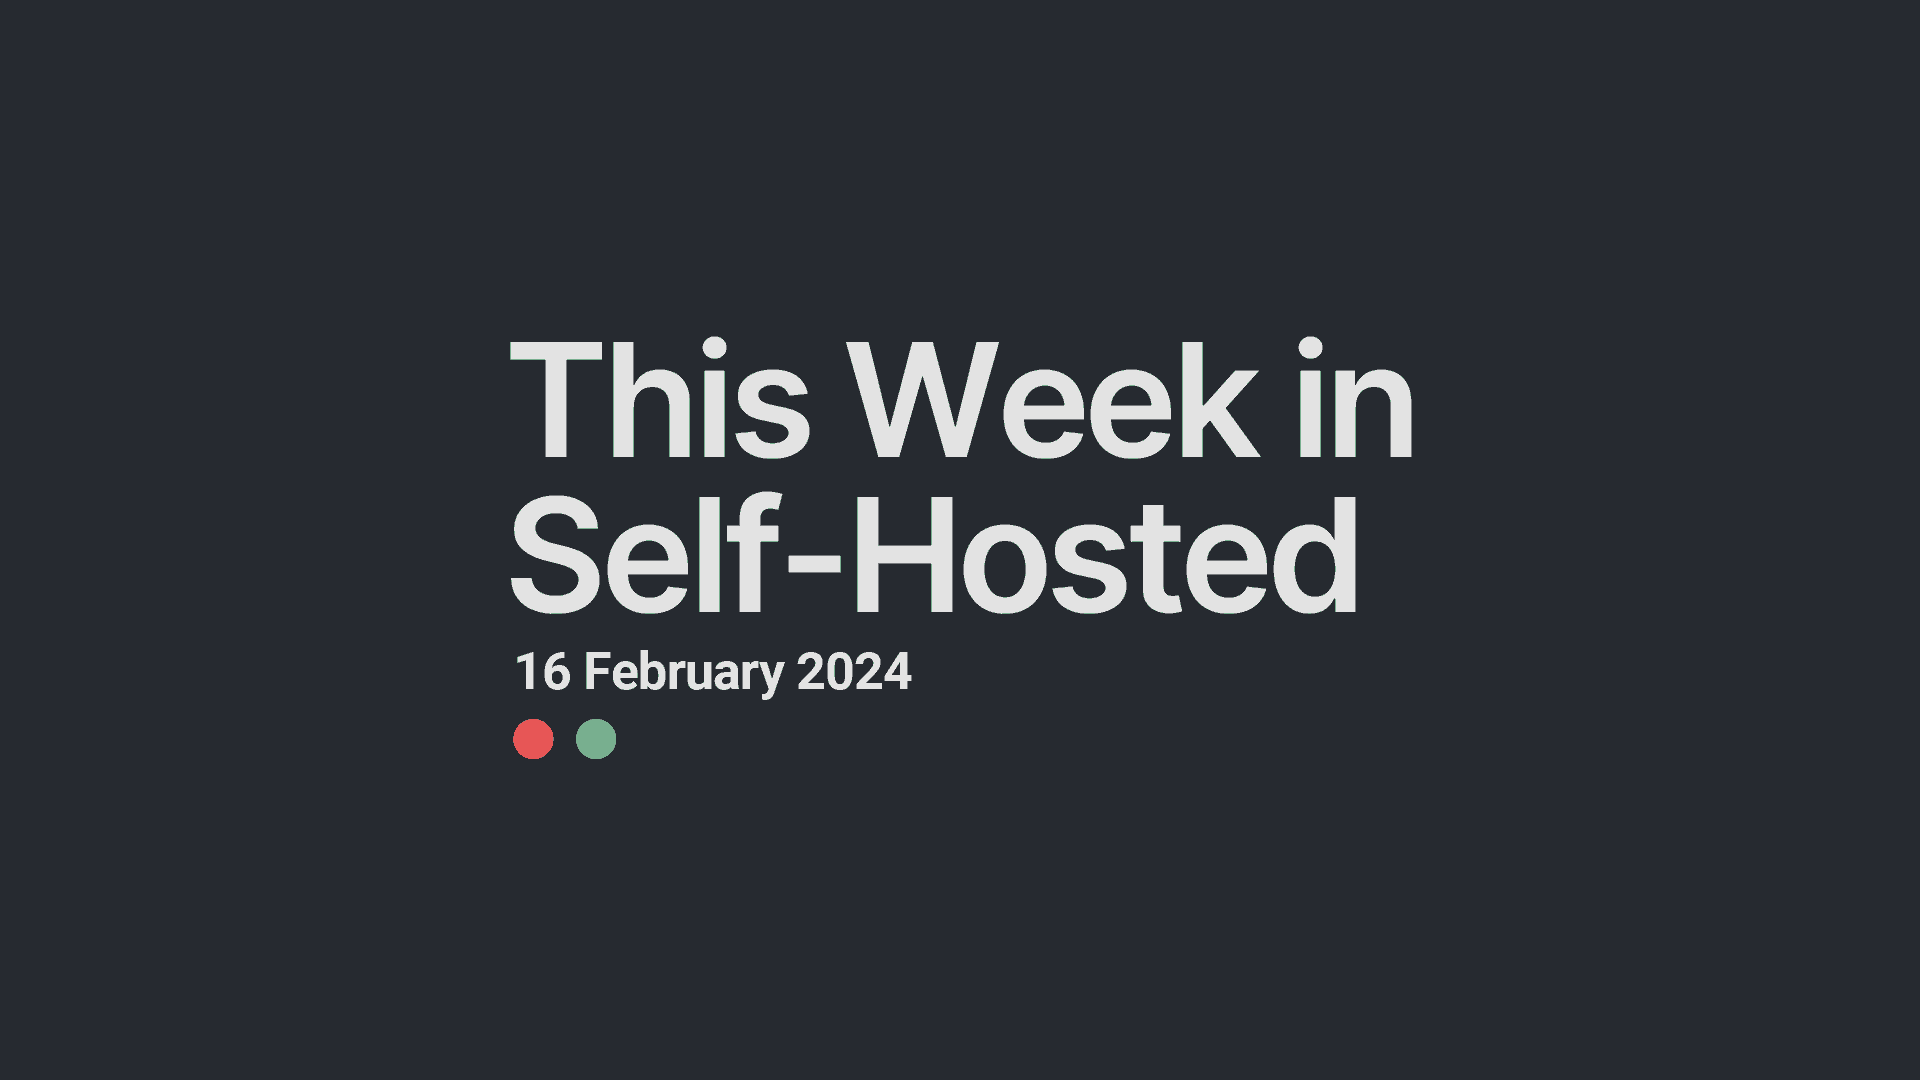 This Week in Self-Hosted (16 February 2024) Post image